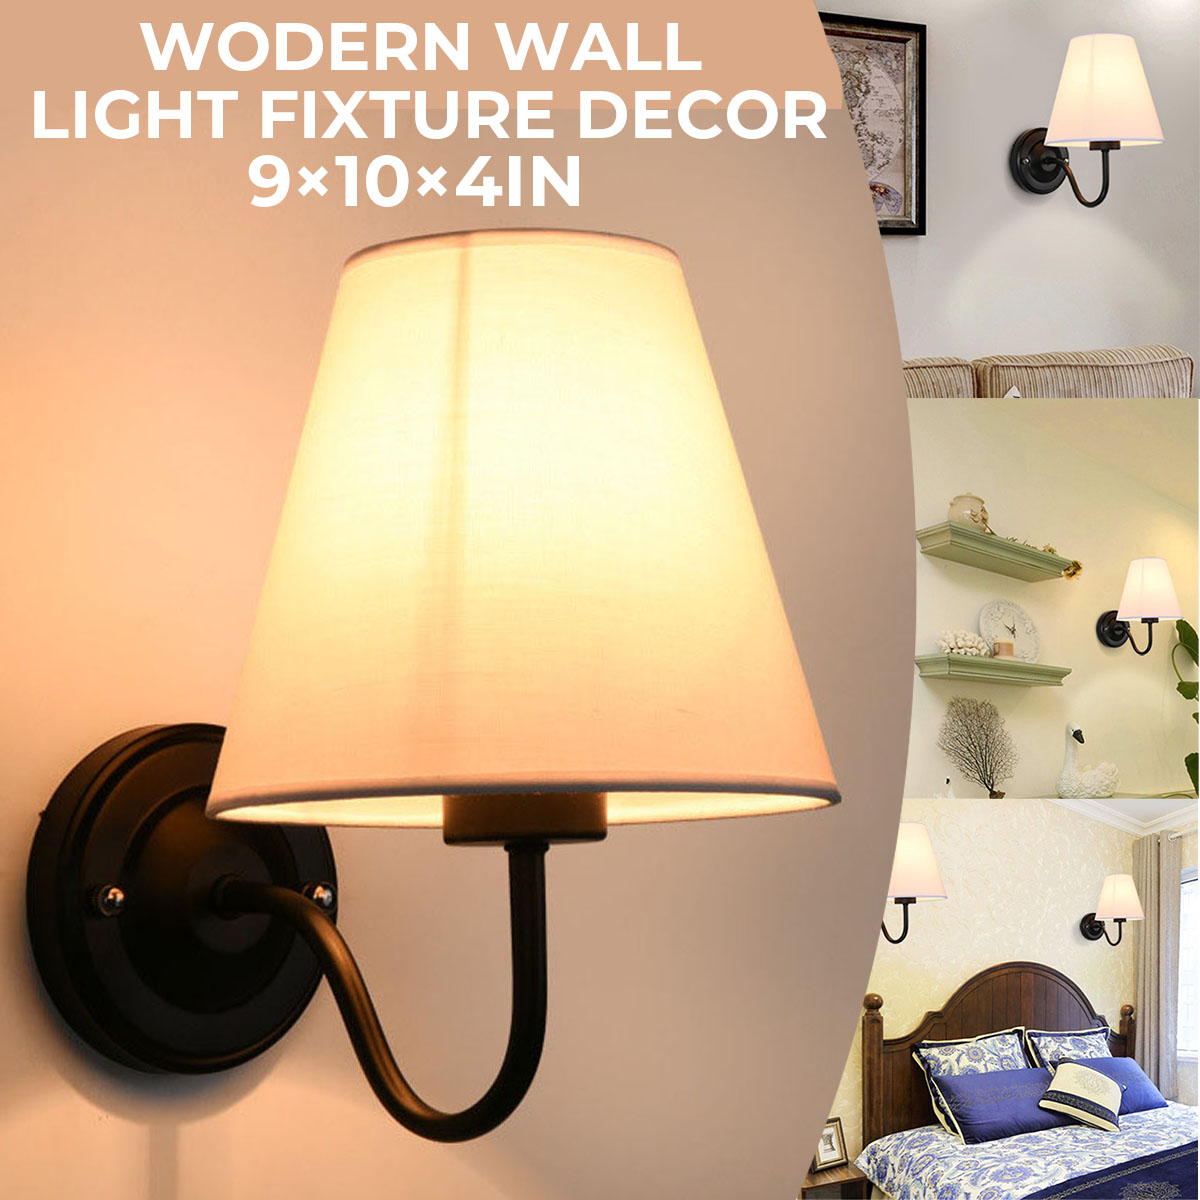 Vintage-Wall-Light-American-Style-Bedroom-Wrought-Iron-Retro-Bedside-Lamp-with-Power-Switch-Cord-Wit-1809575-1